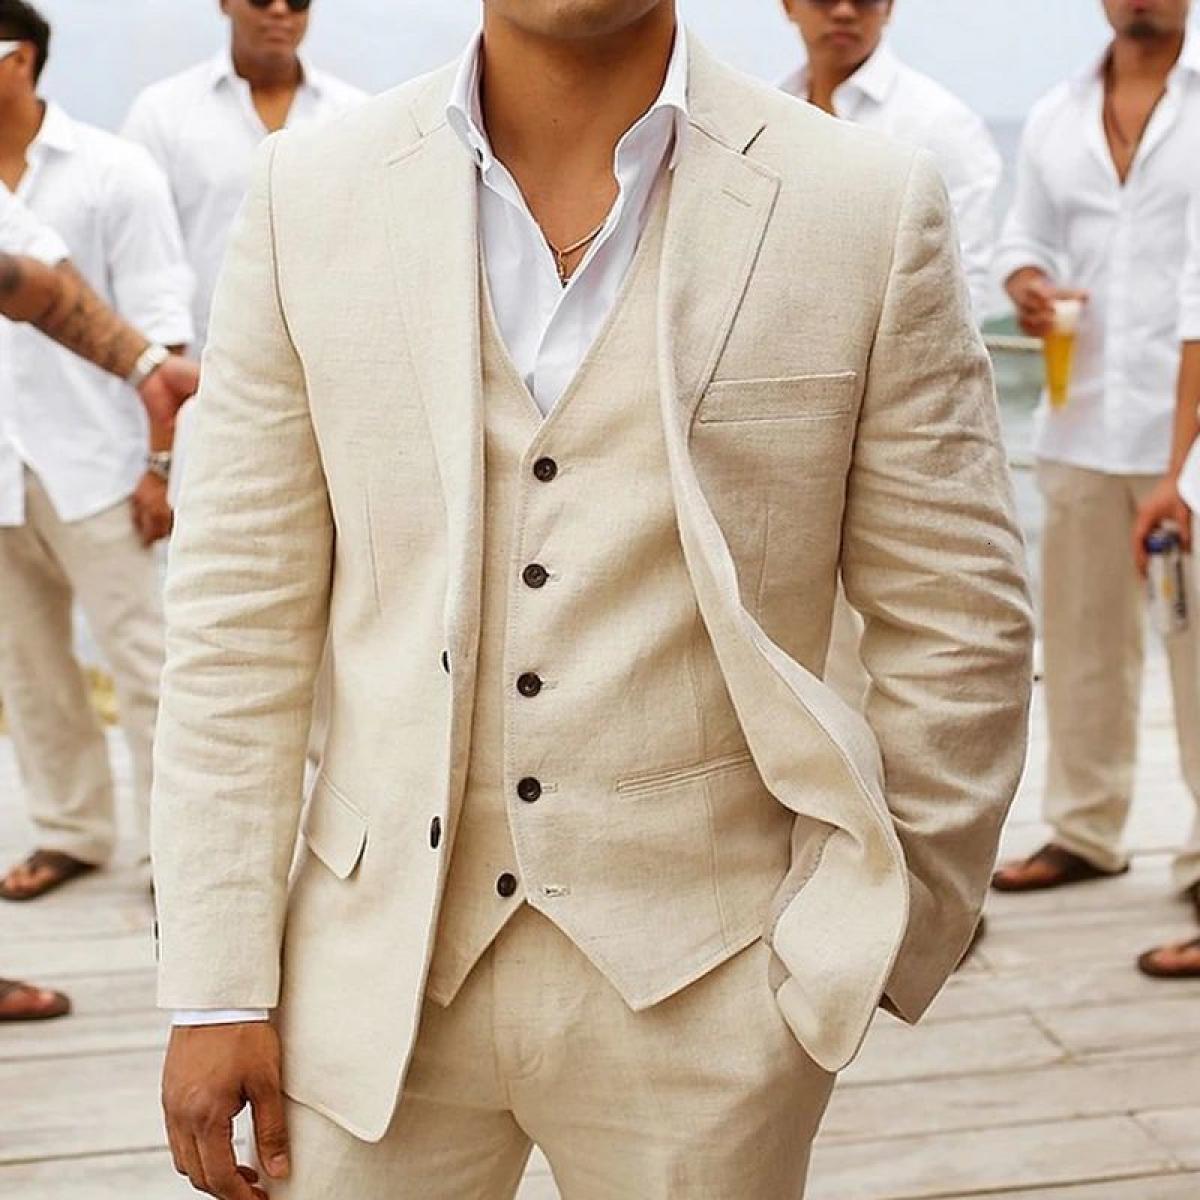 Mens Suits Blazers 3 Piece Linen Summer For Wedding Groom Tuxedos Casual Beach Custom Set Jacket Vest With Pants Fahion